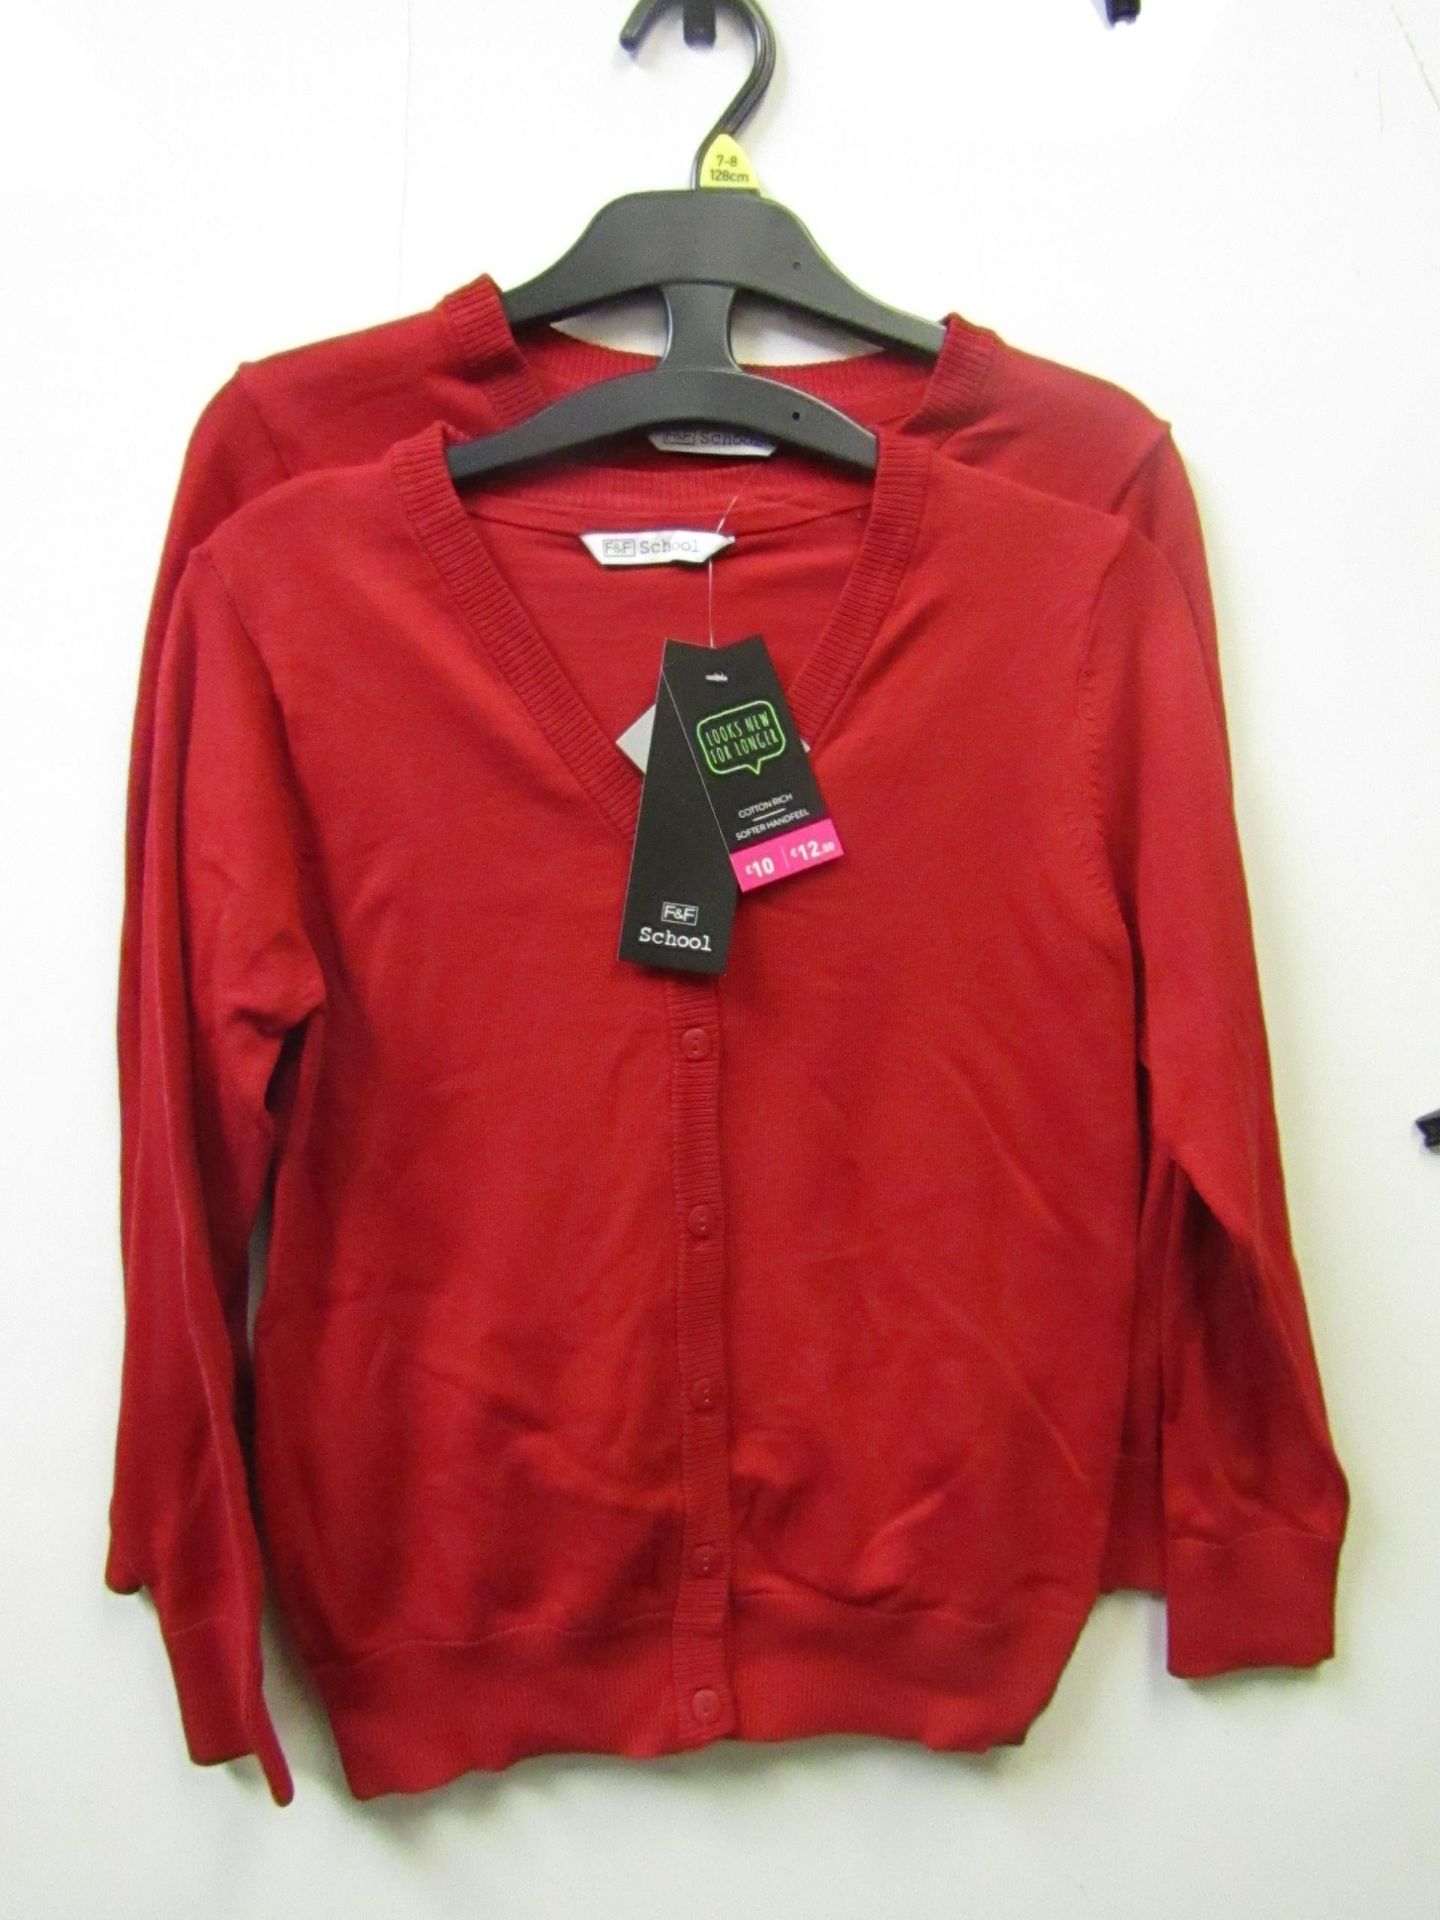 3x girls 2piece school cardigan red - size 7/8 - new but might have security tags on.